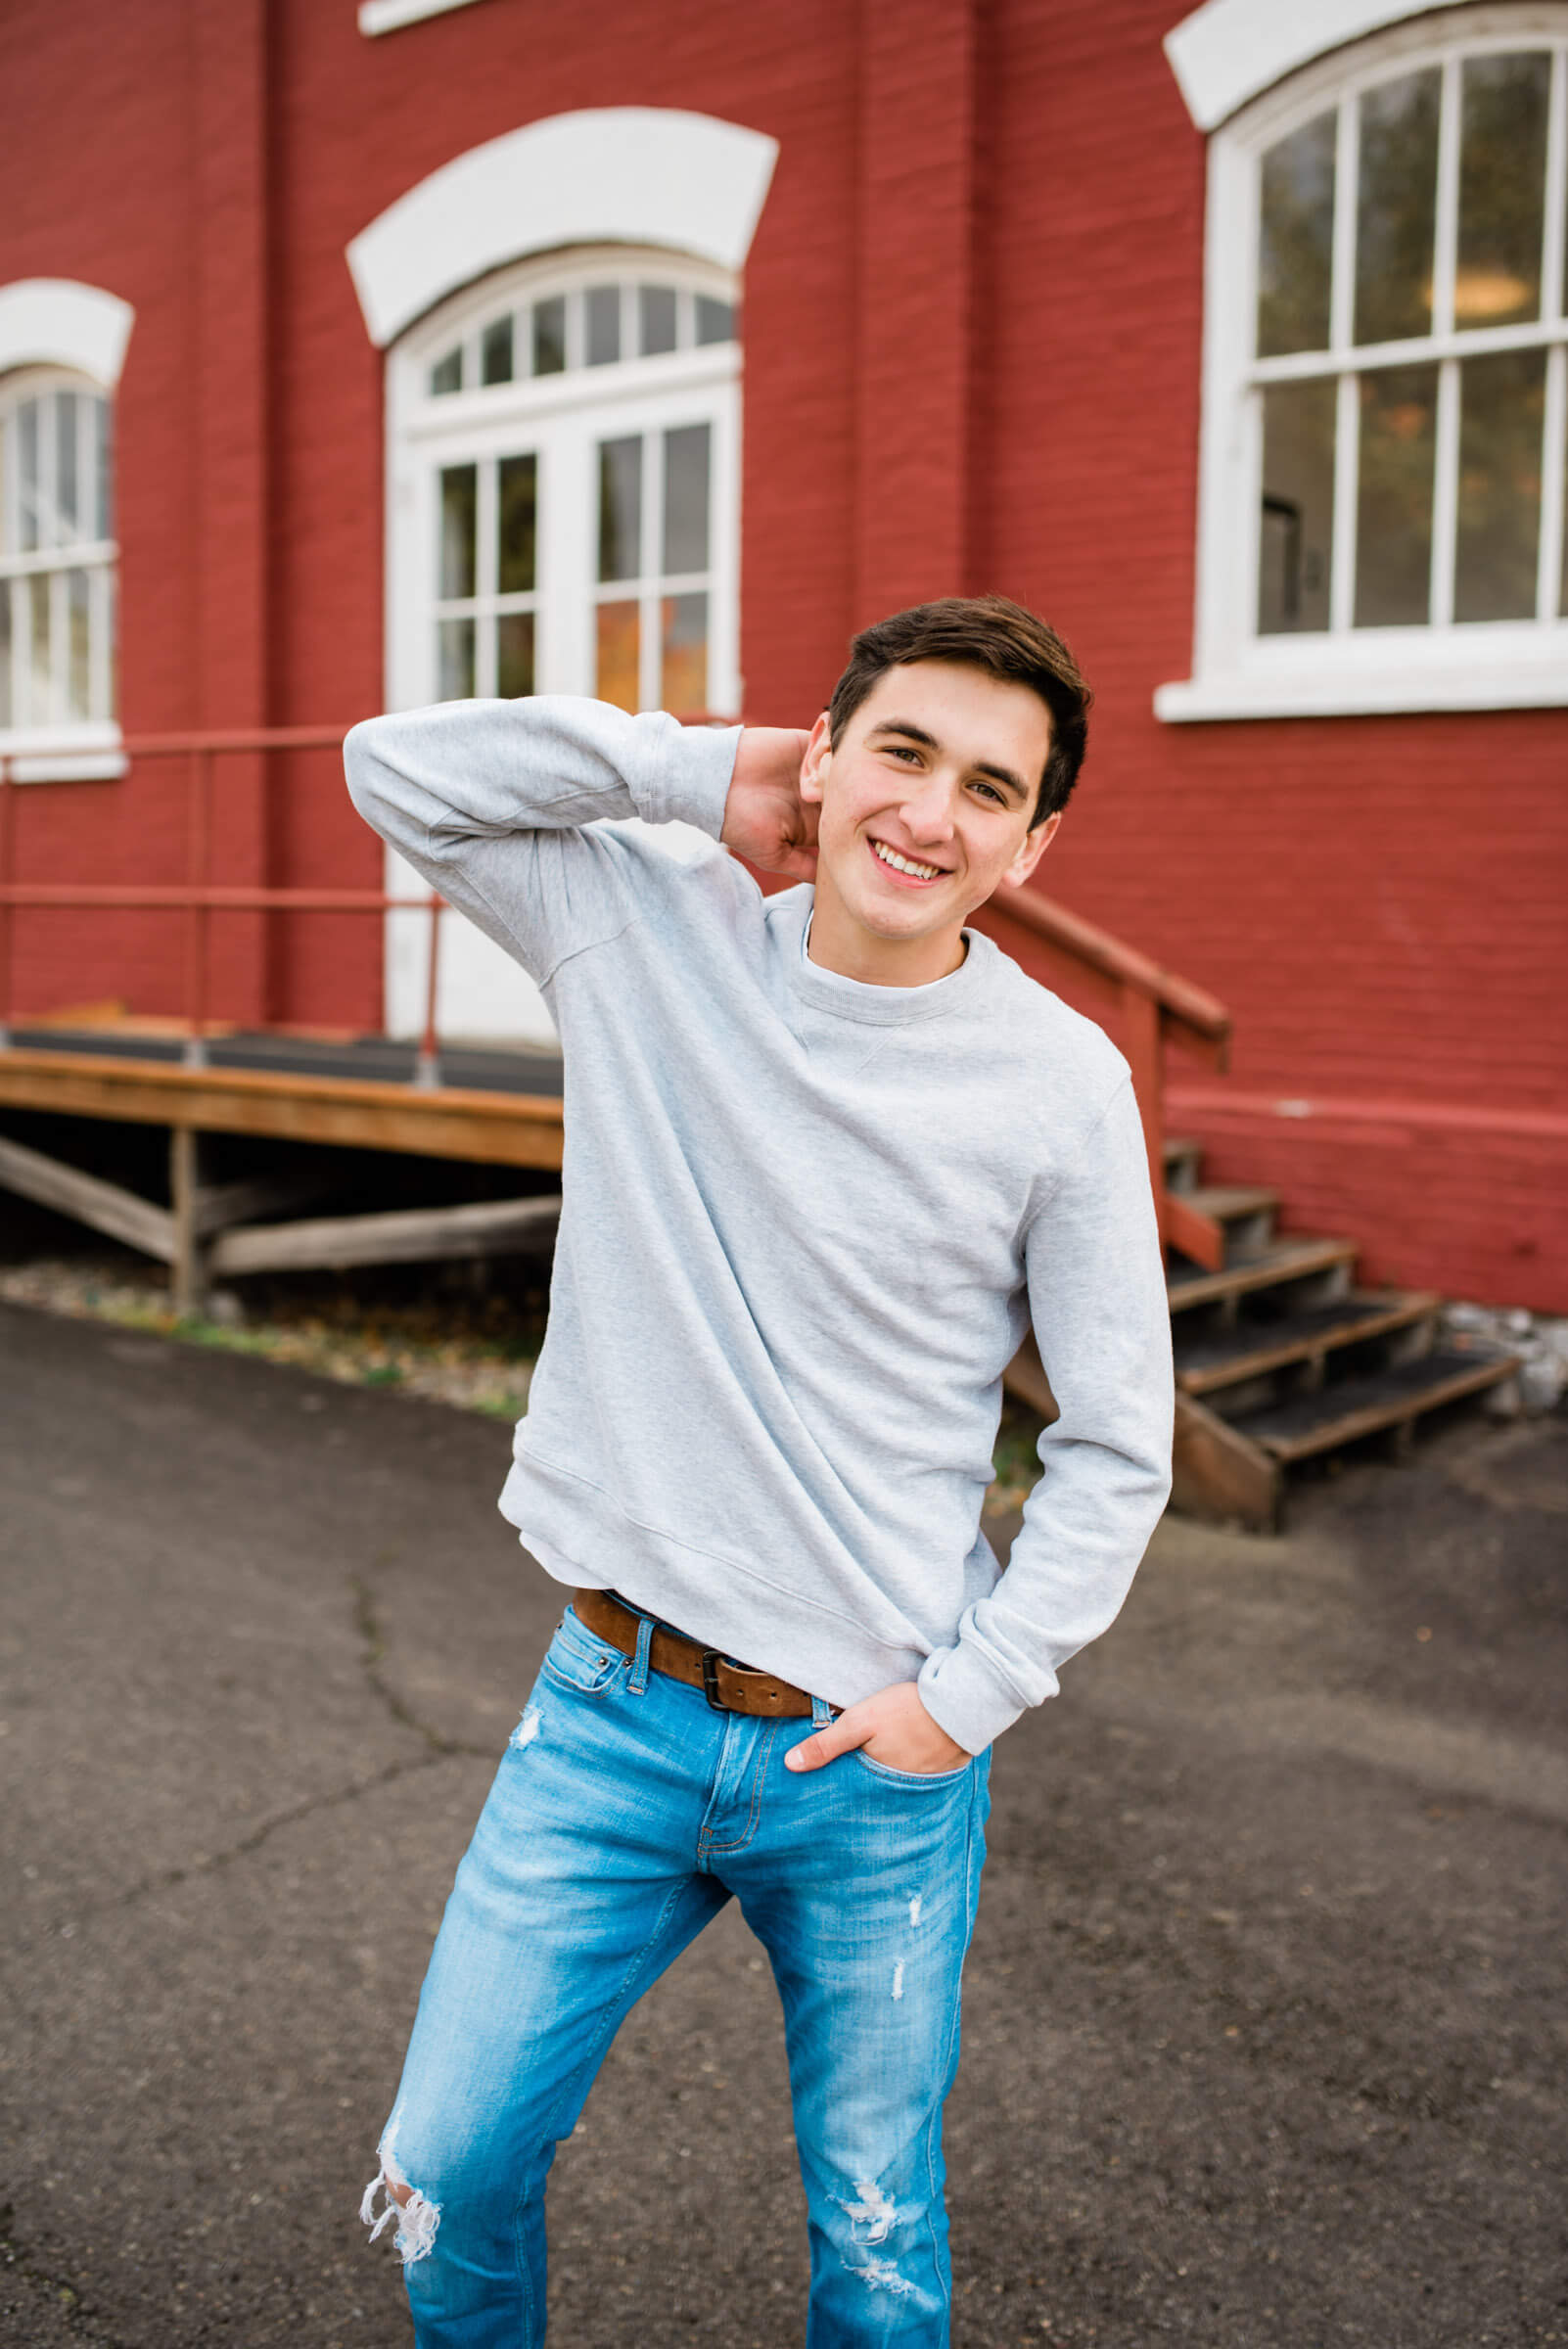 senior boy walking away from red building and rubbing neck during senior portraits